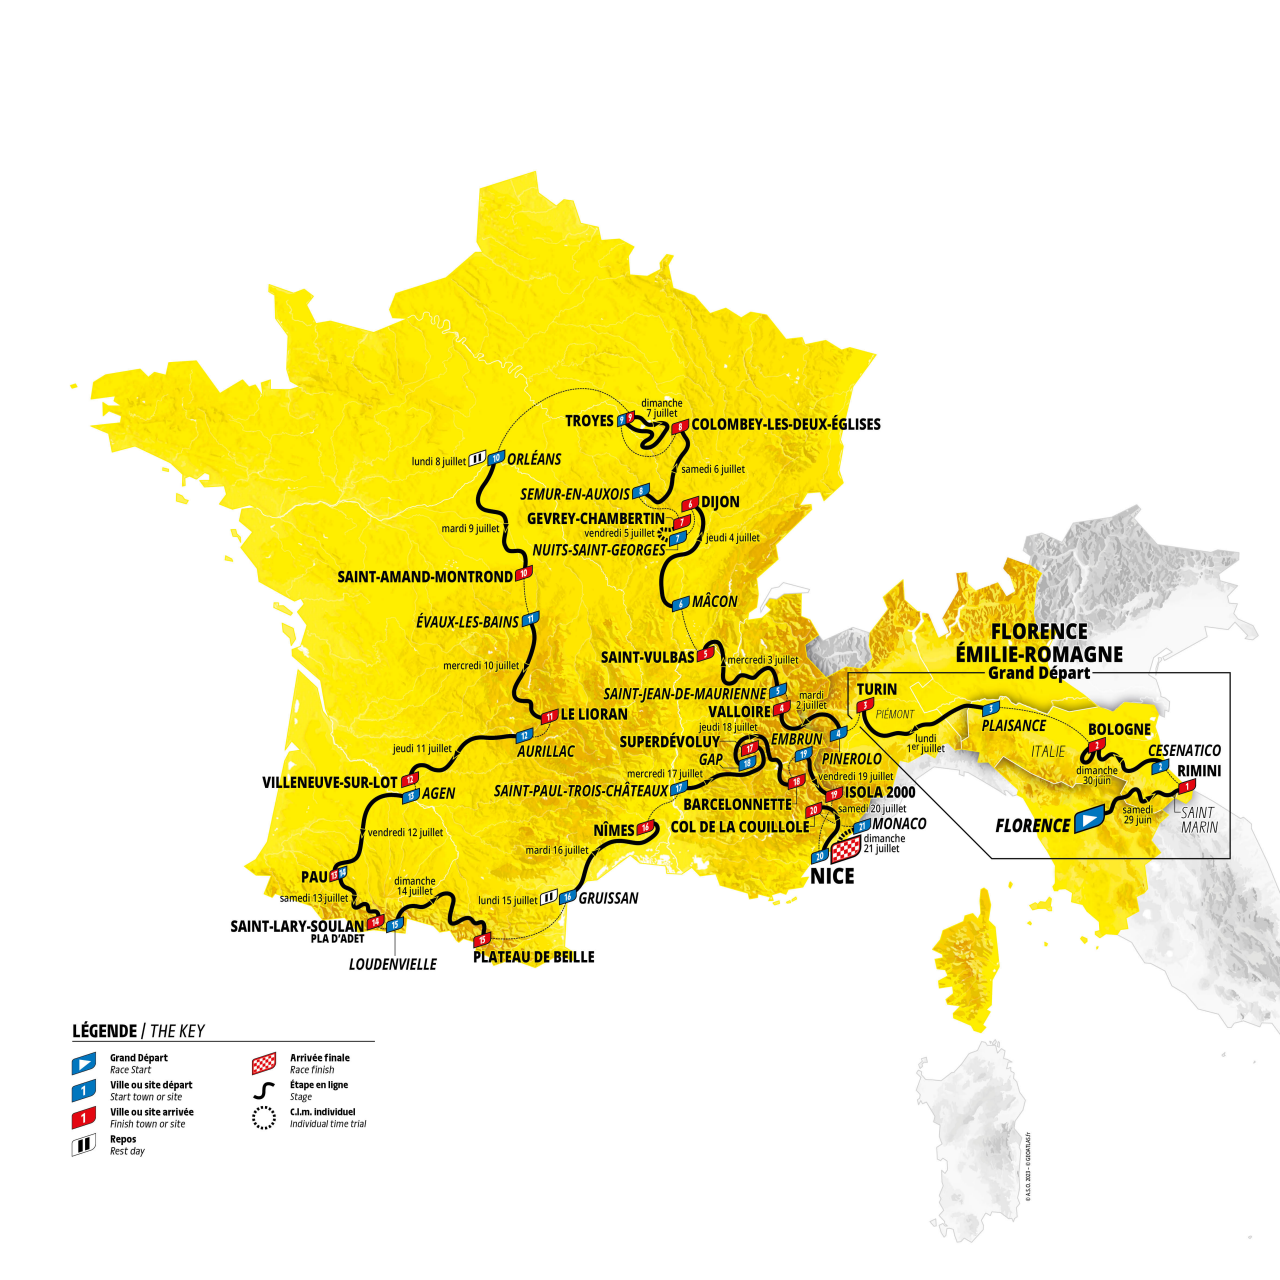 This map shows the route of the 2022 edition of the Tour de France